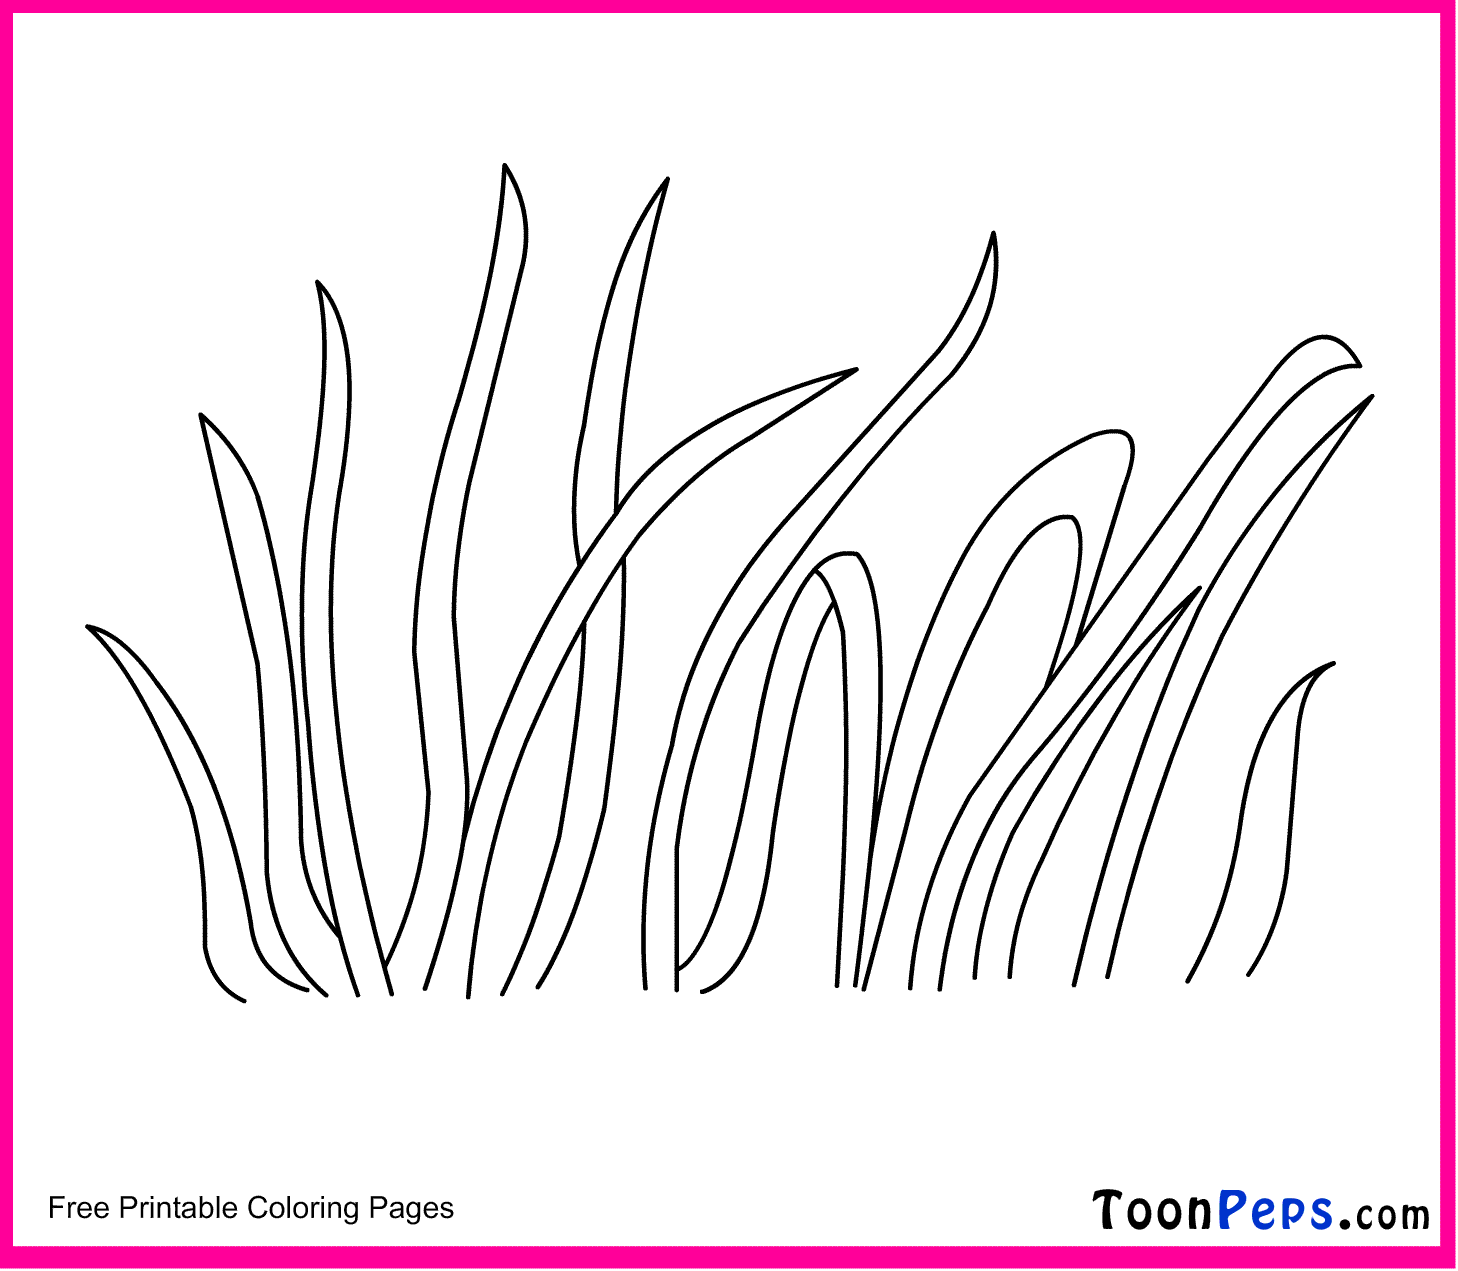 free-printable-grass-coloring-pages-printable-templates